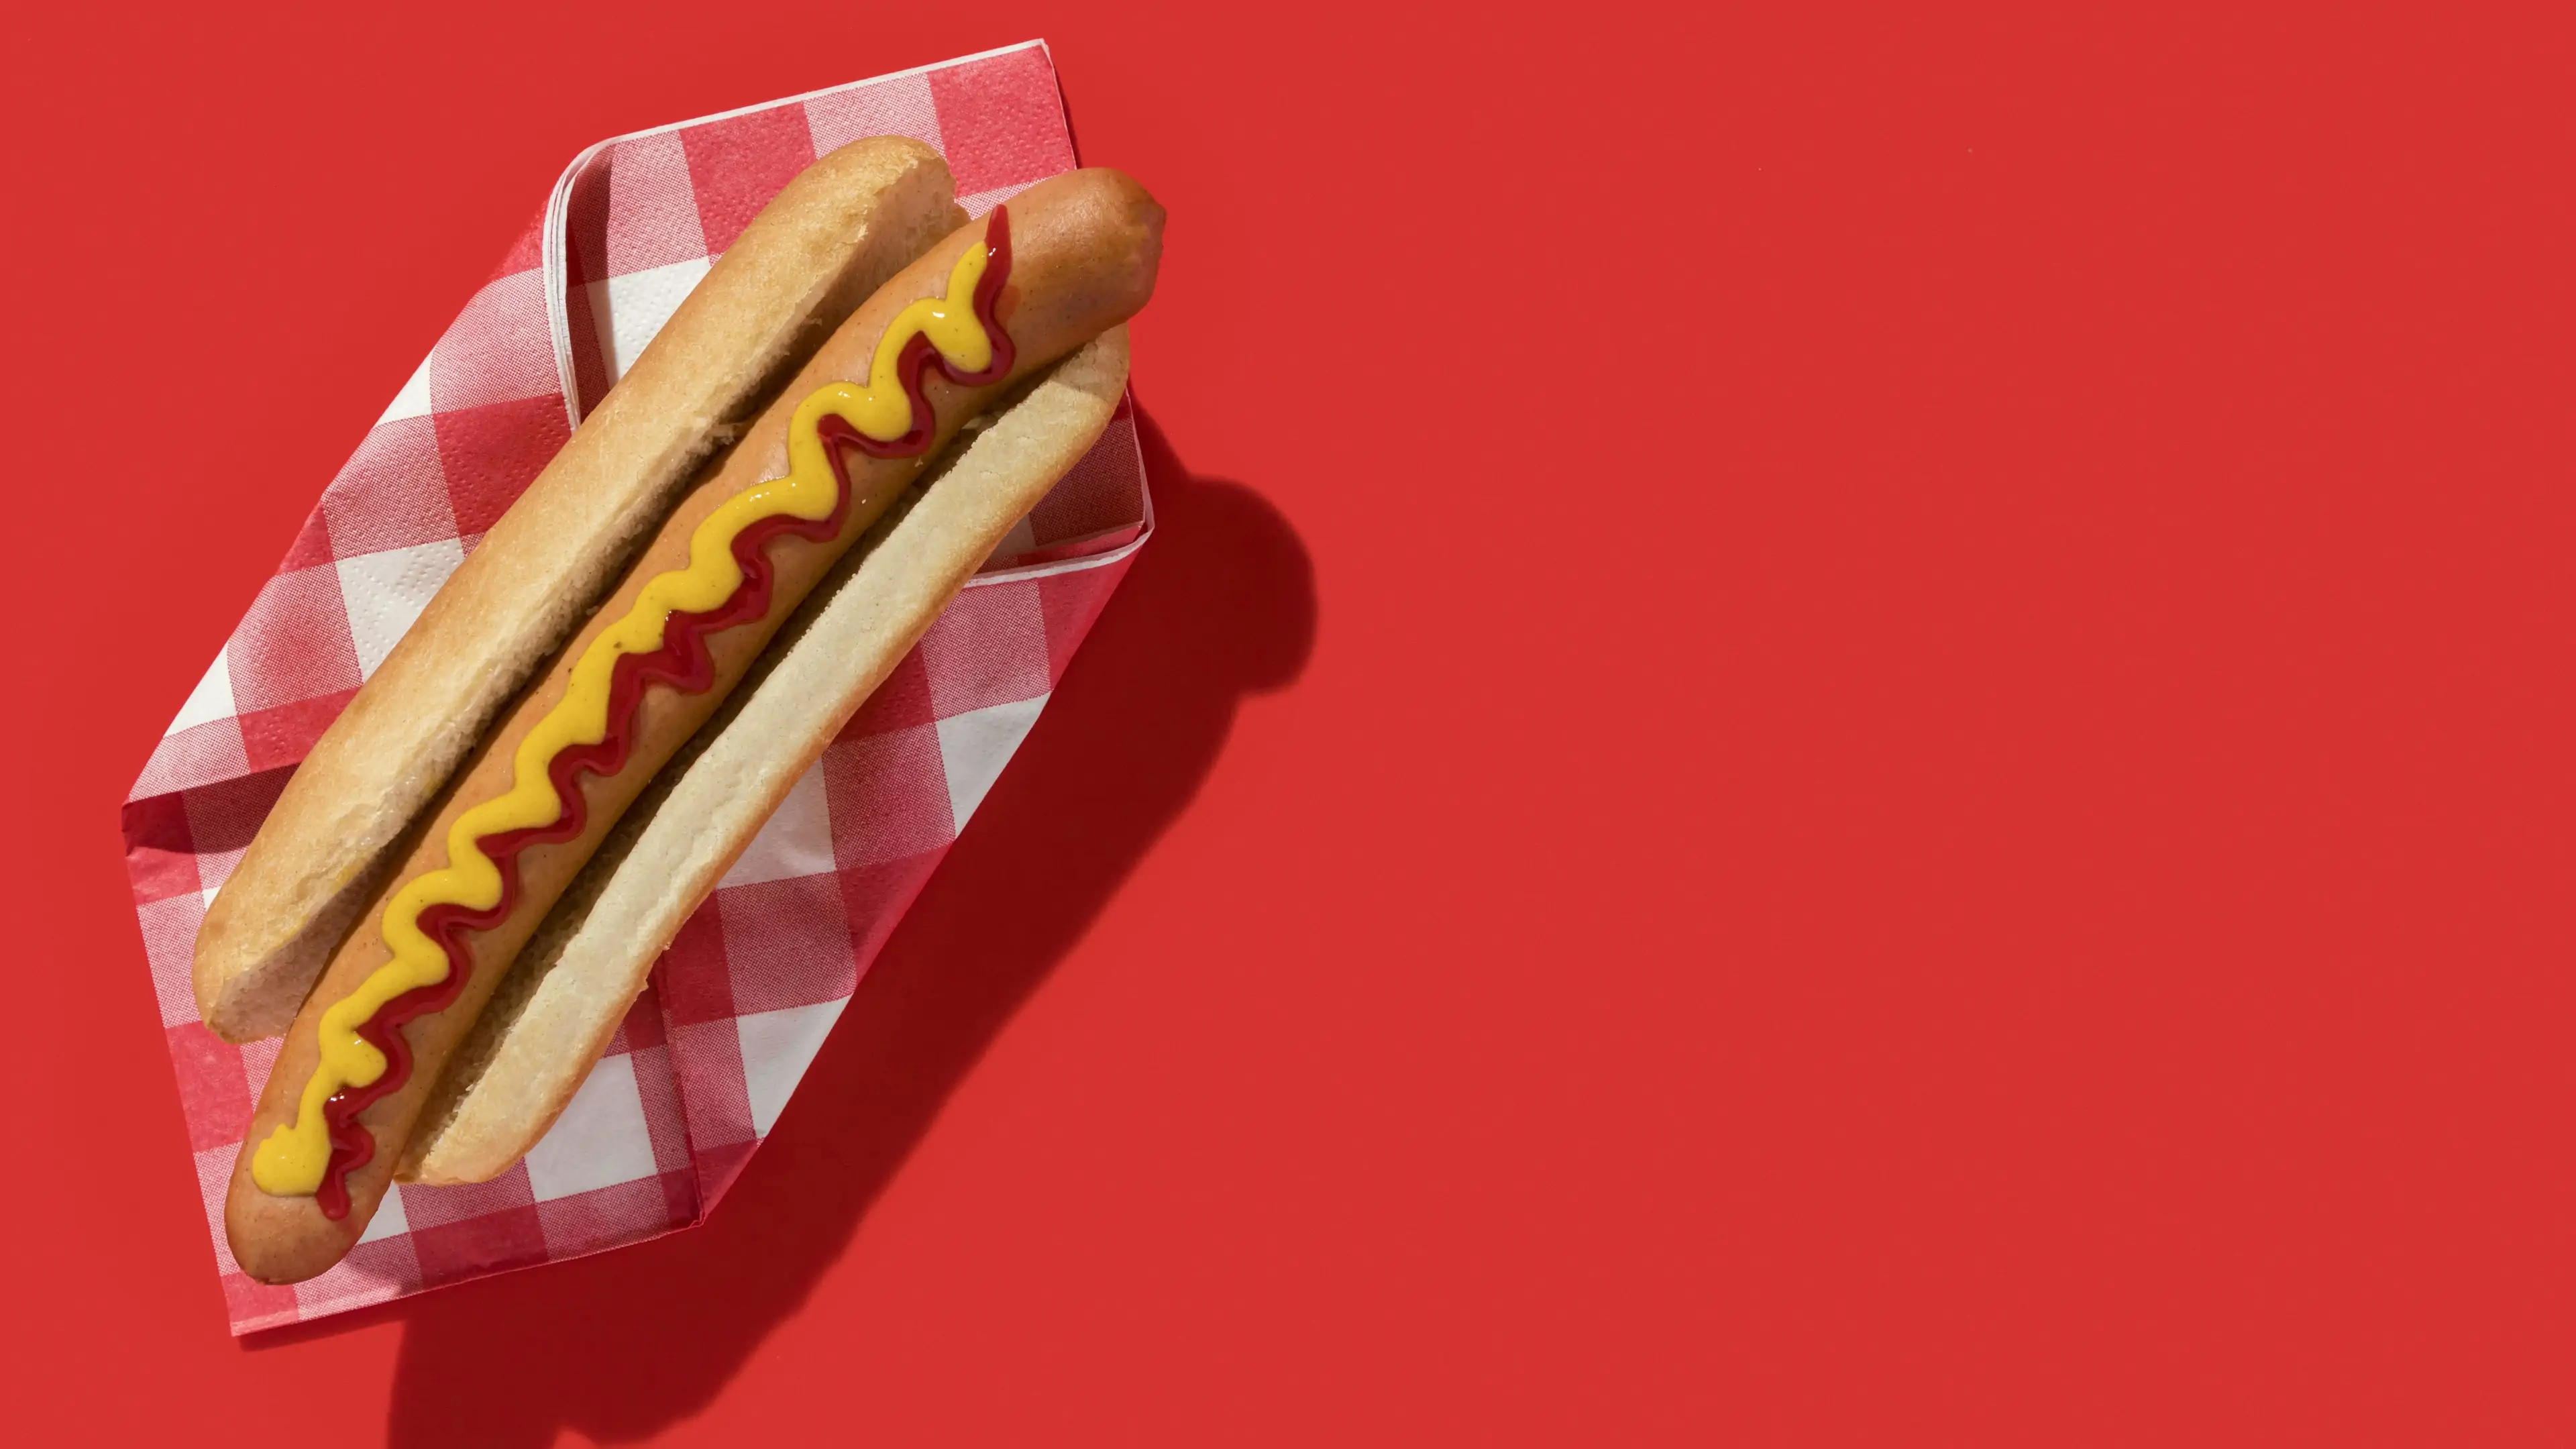 Hotdog with ketchup and mustard on red background